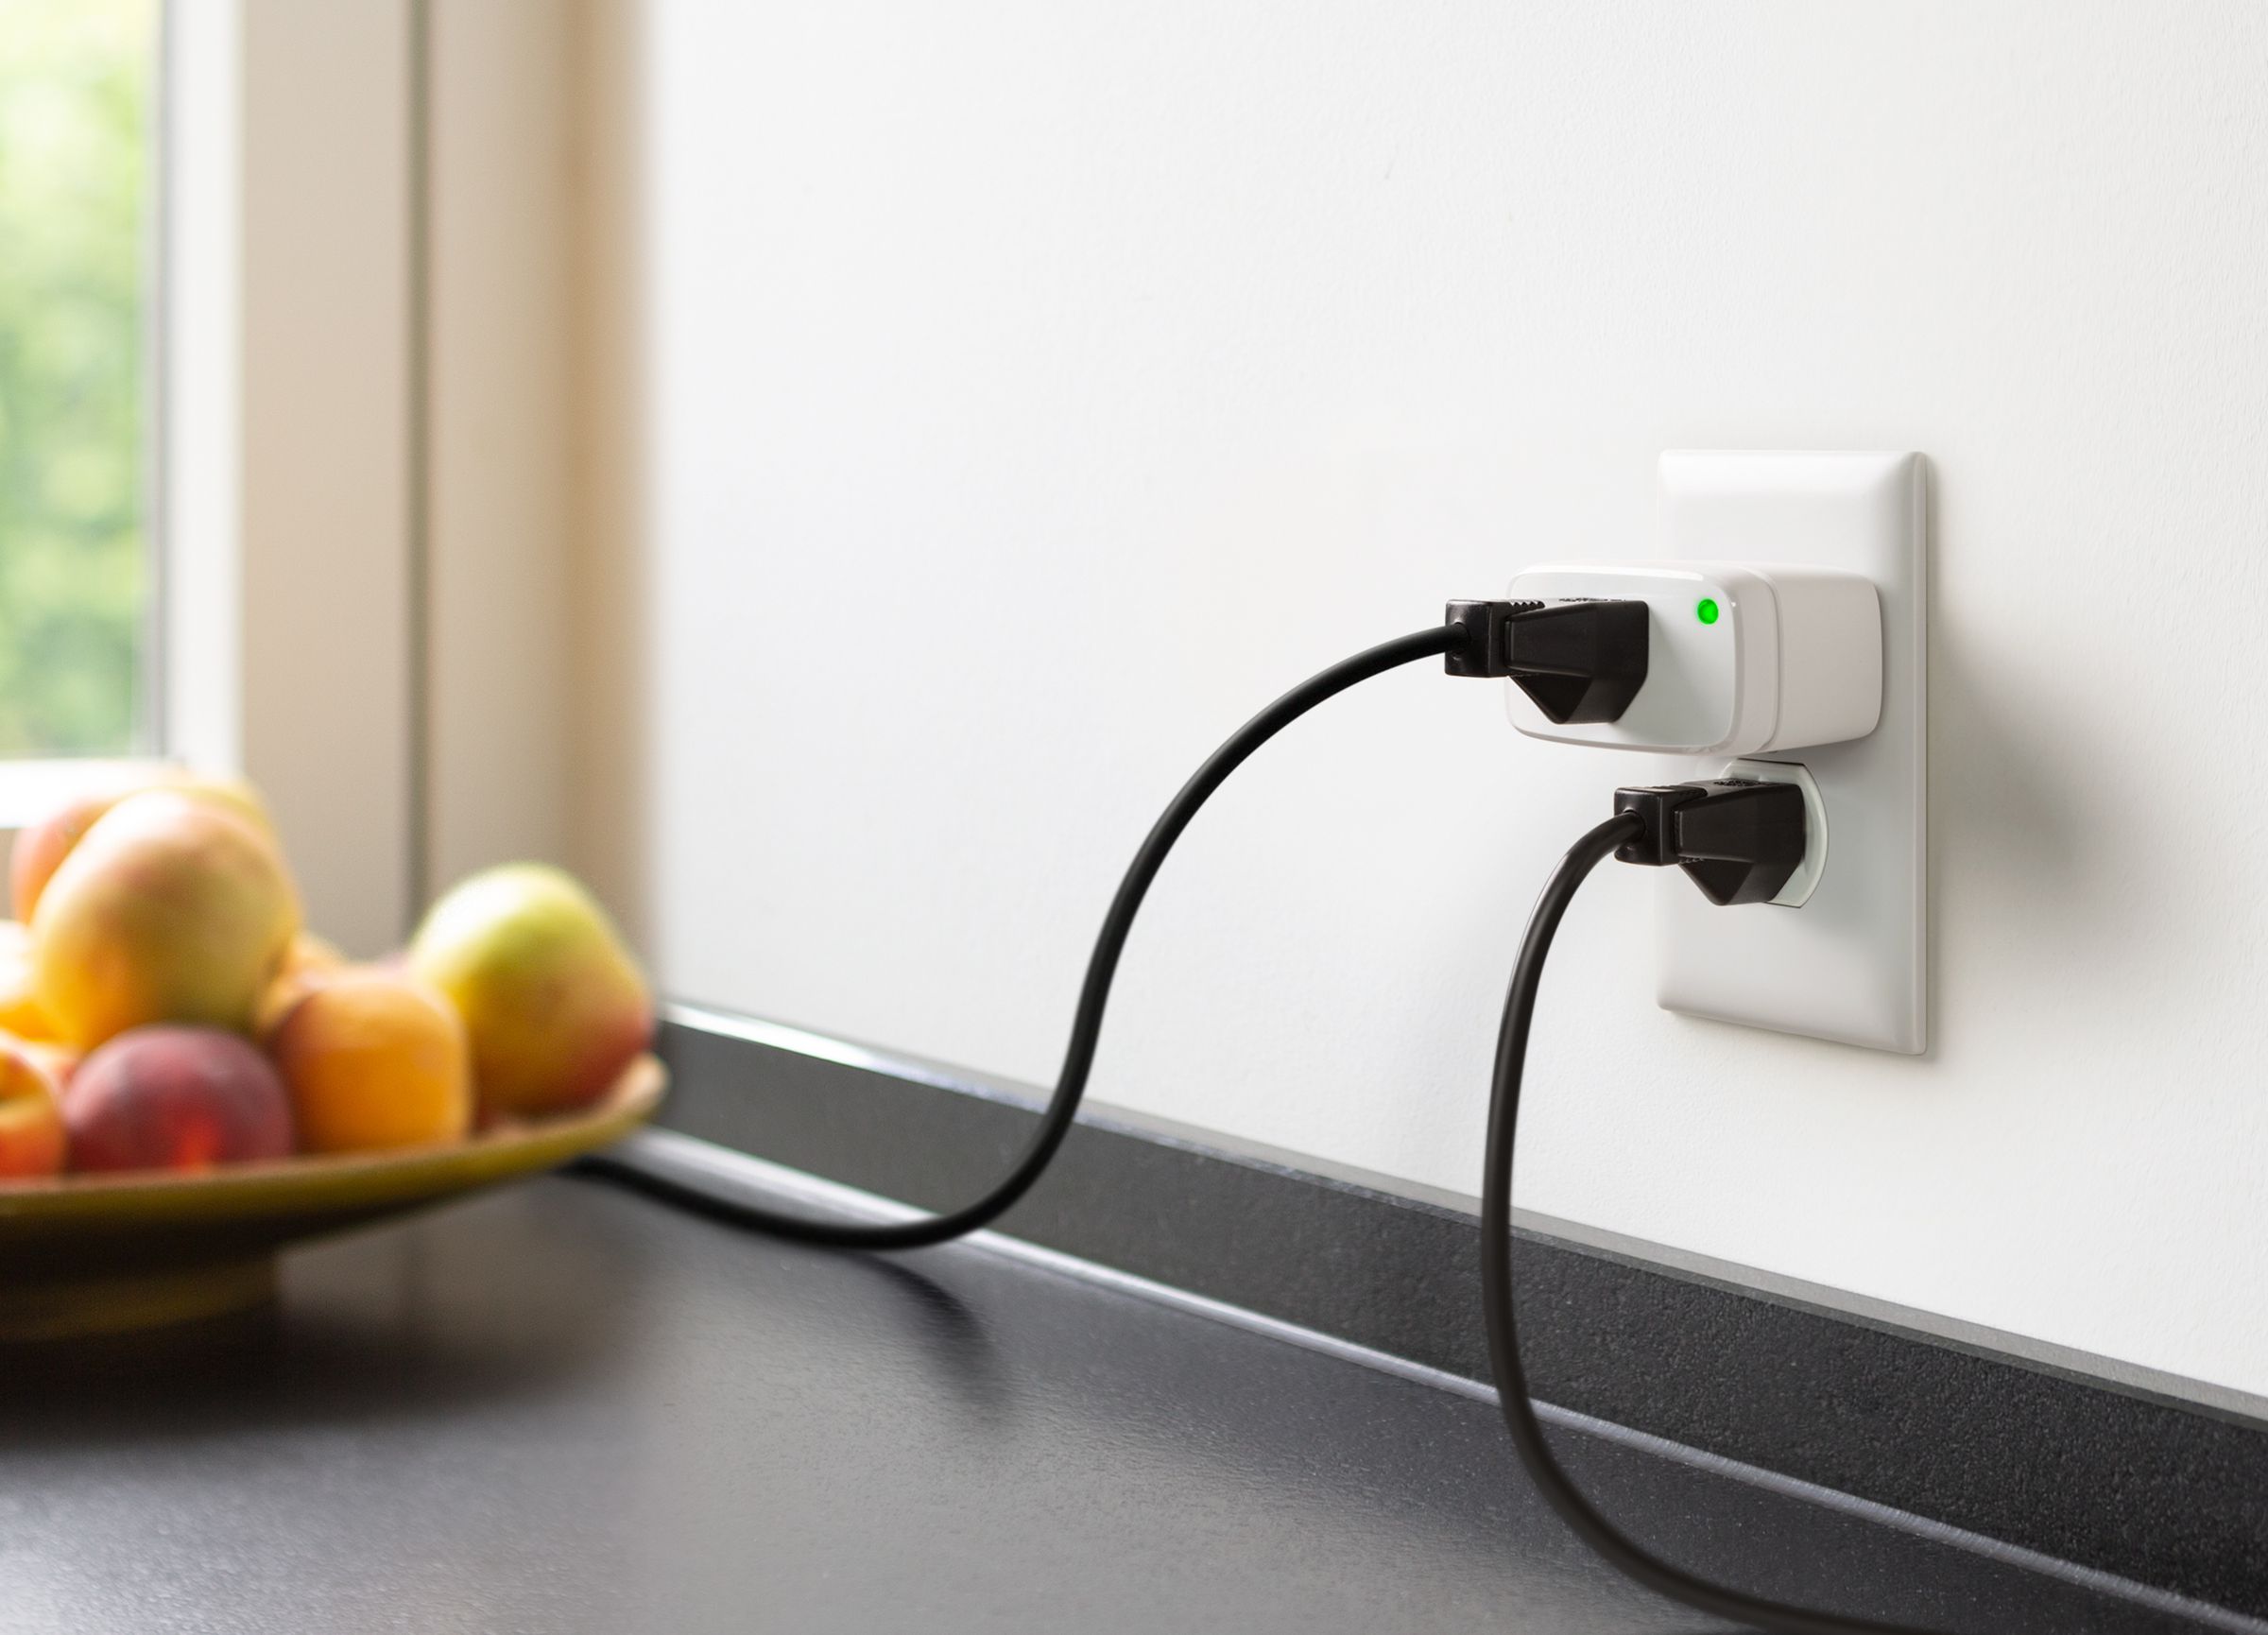 The latest version of the Eve Energy smart plug adds Thread support.